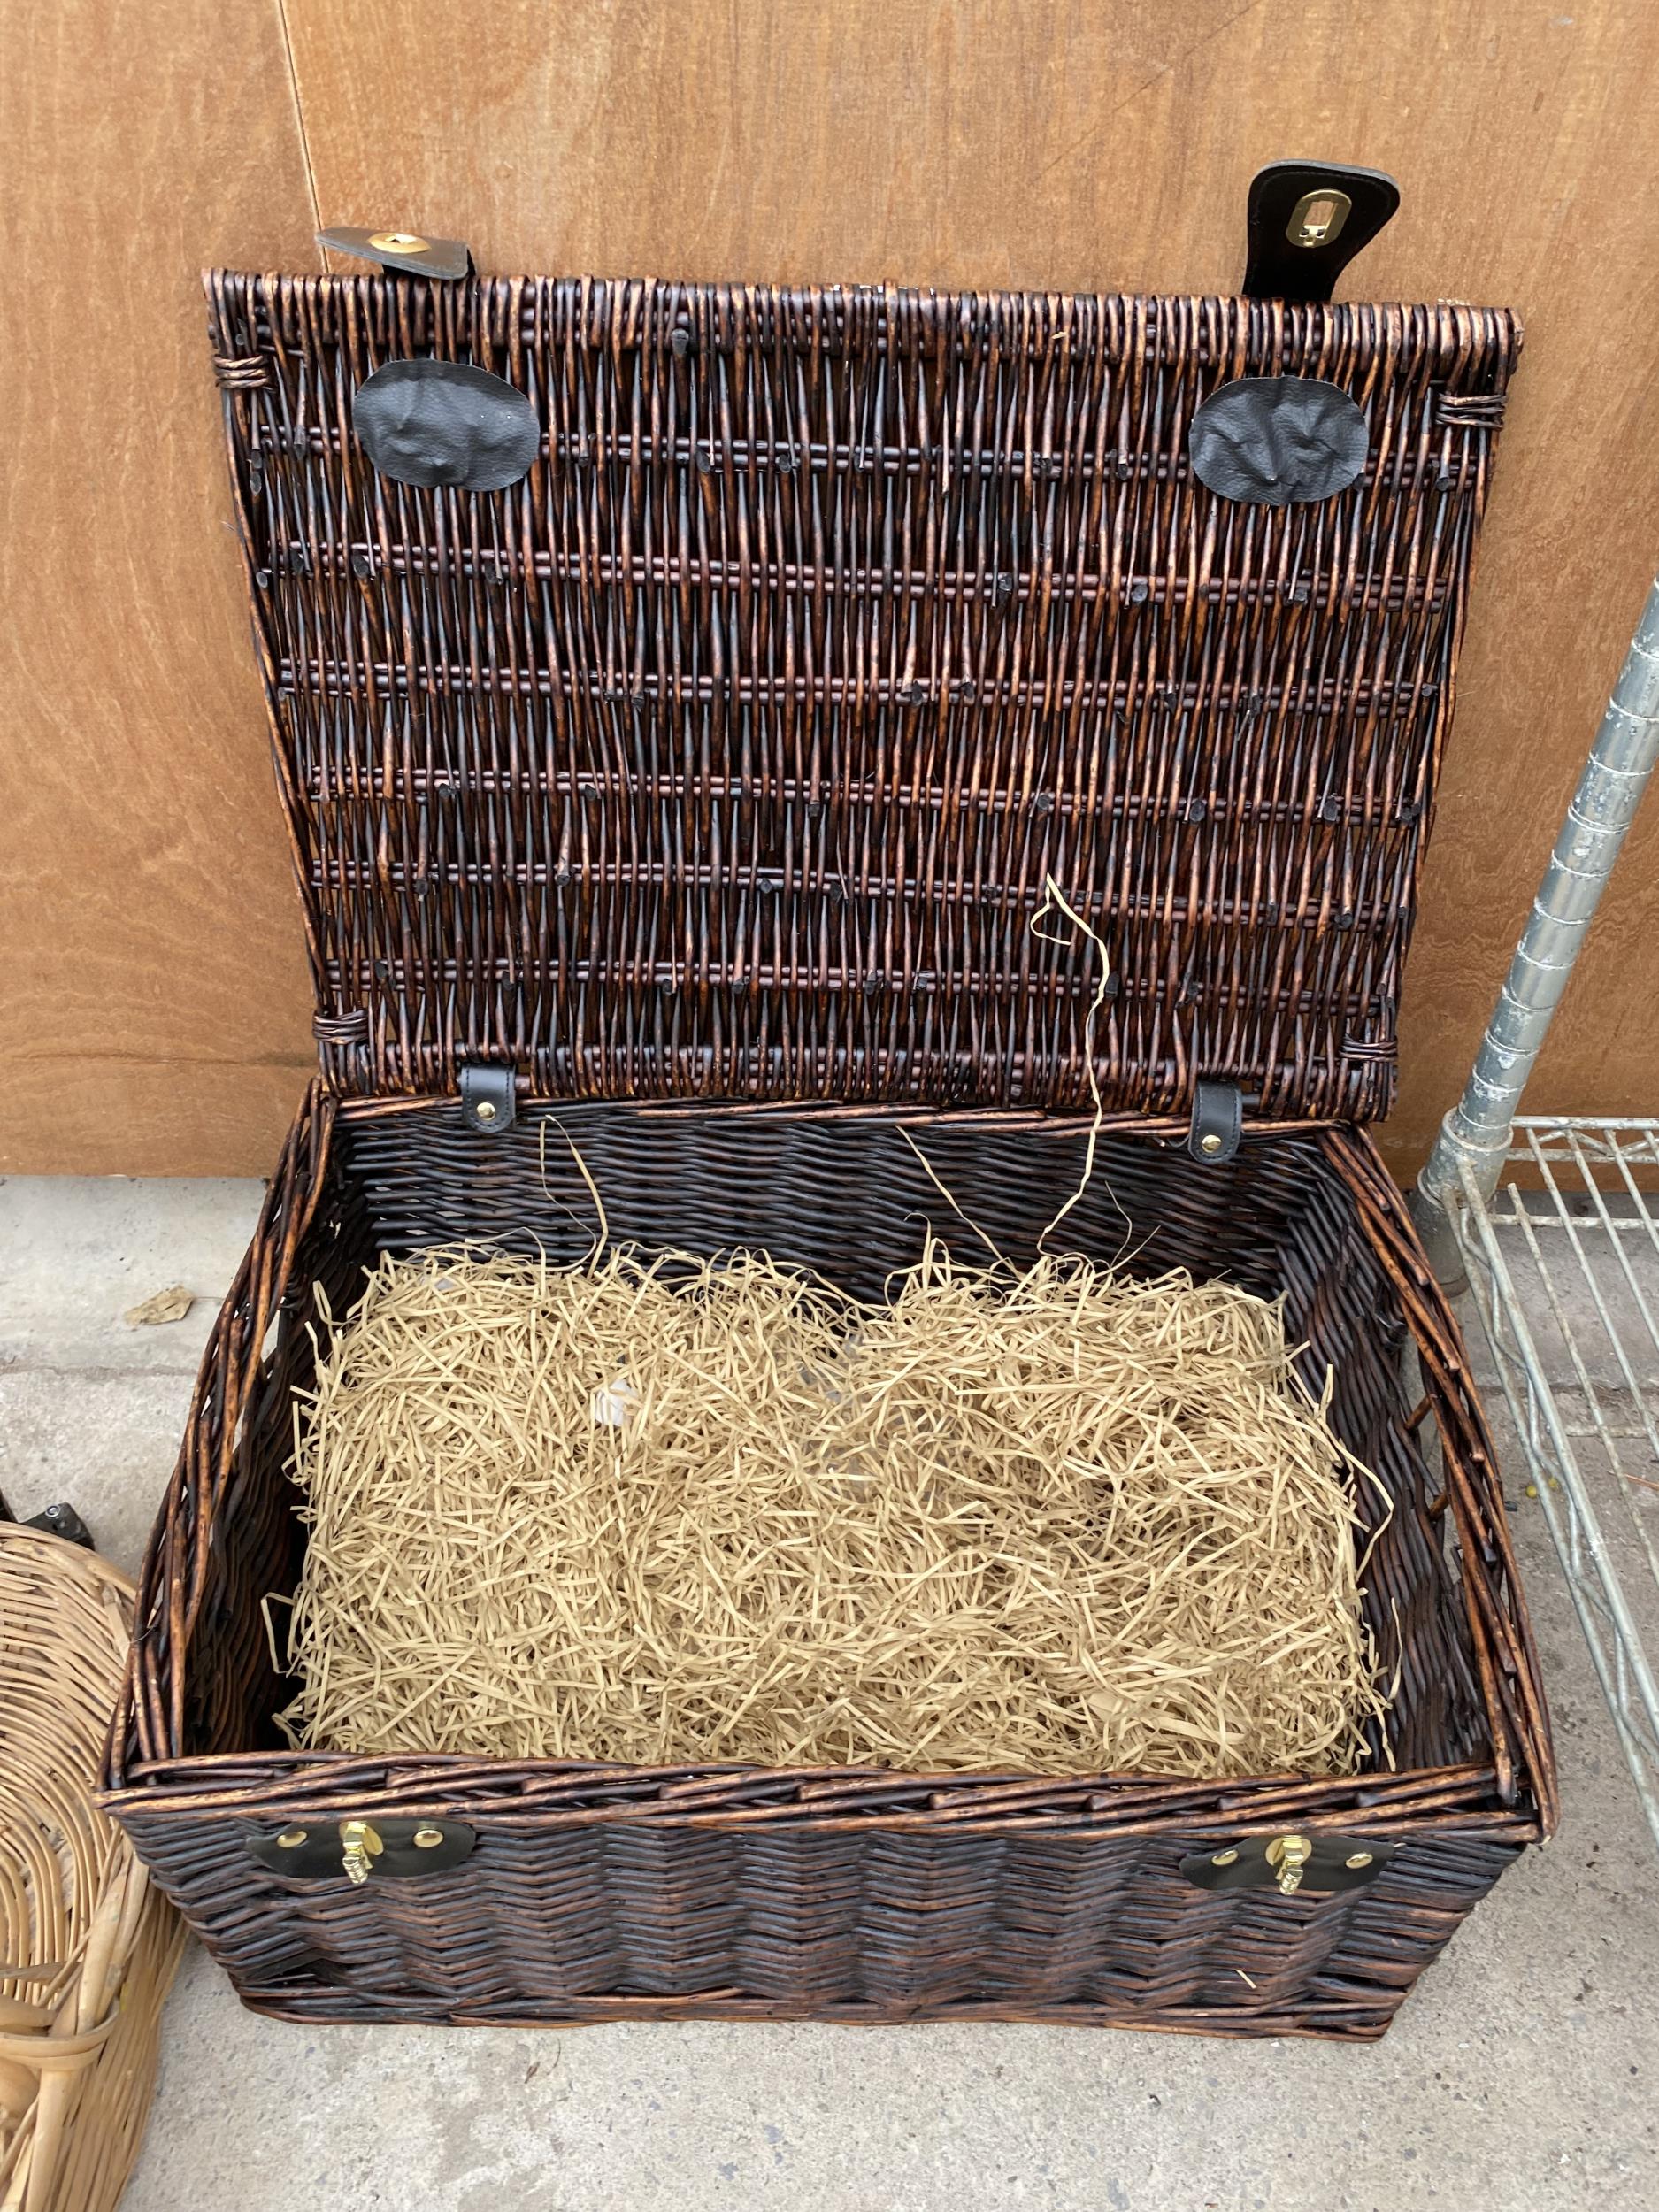 A WICKER PICNIC HAMPER AND TWO FURTHER WICKER BASKETS - Image 4 of 4